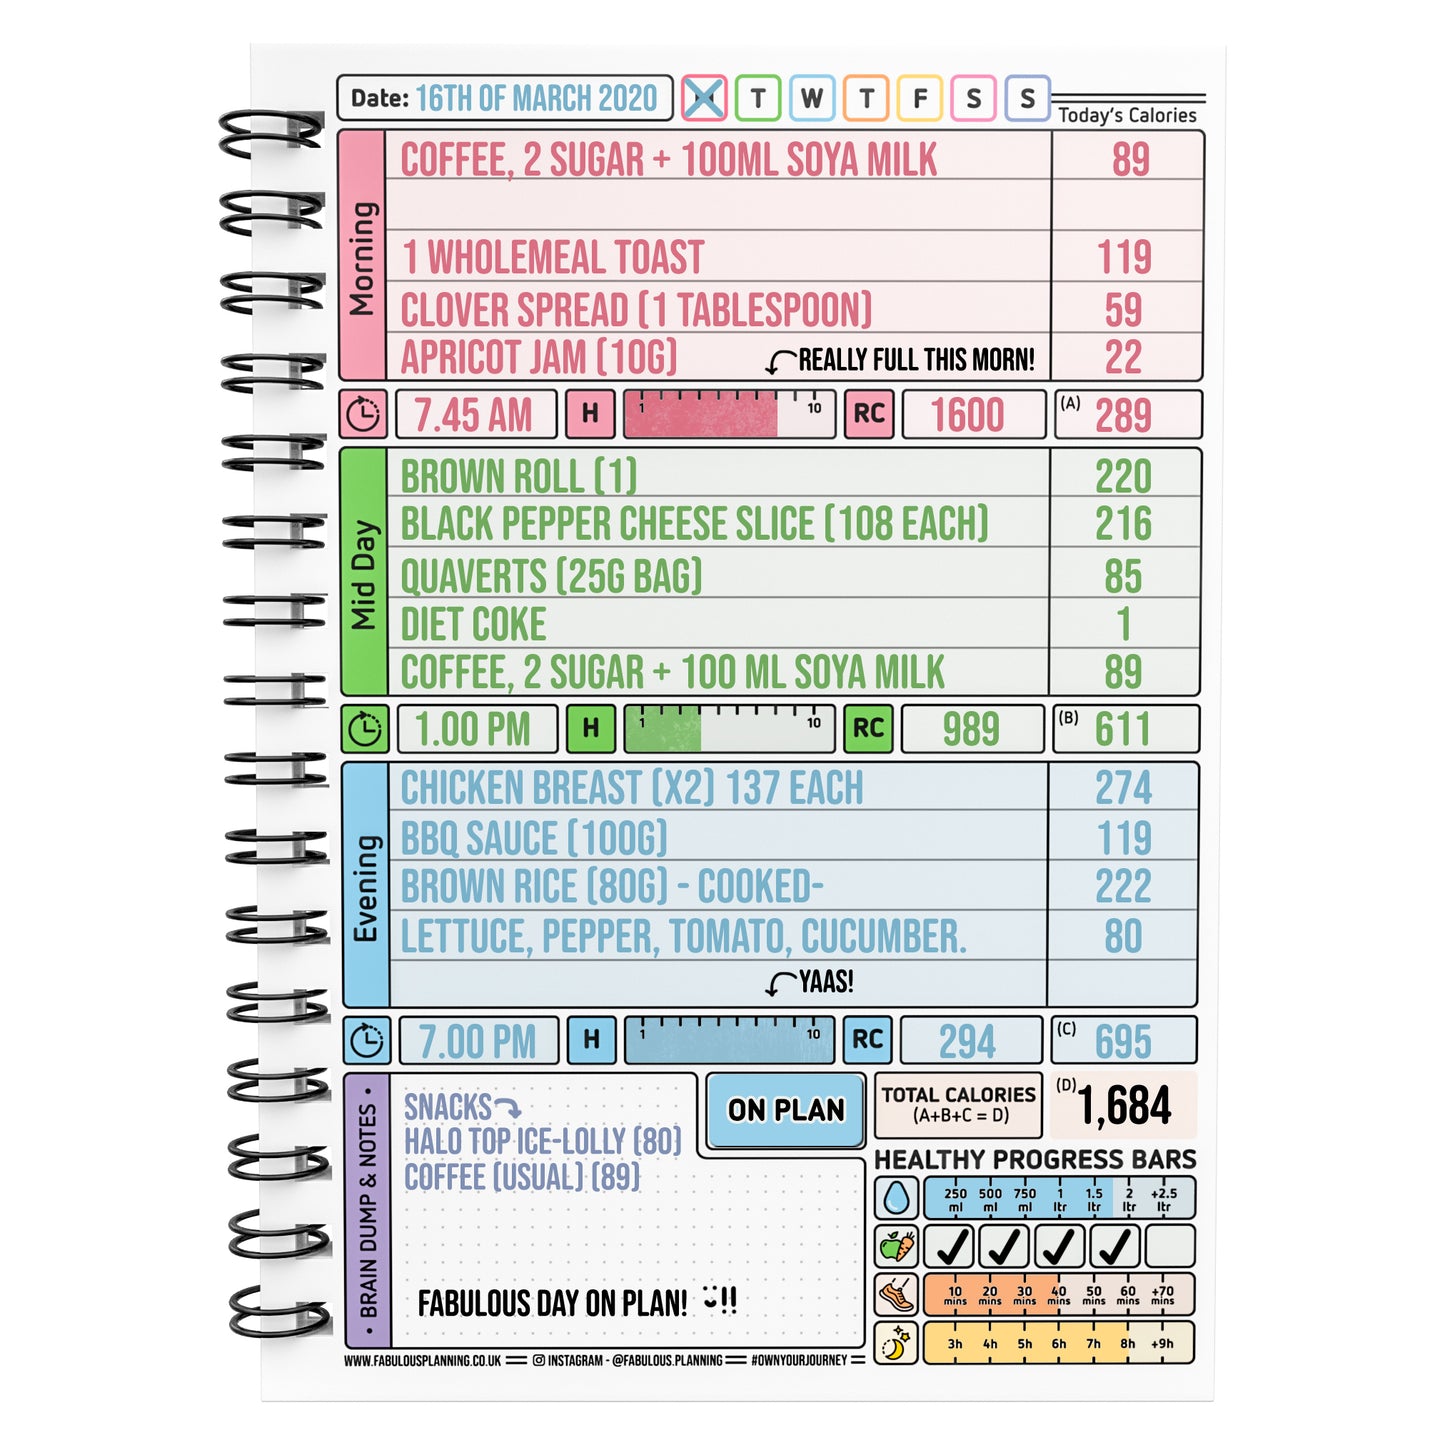 Food Diary - C22 - Calorie Counting